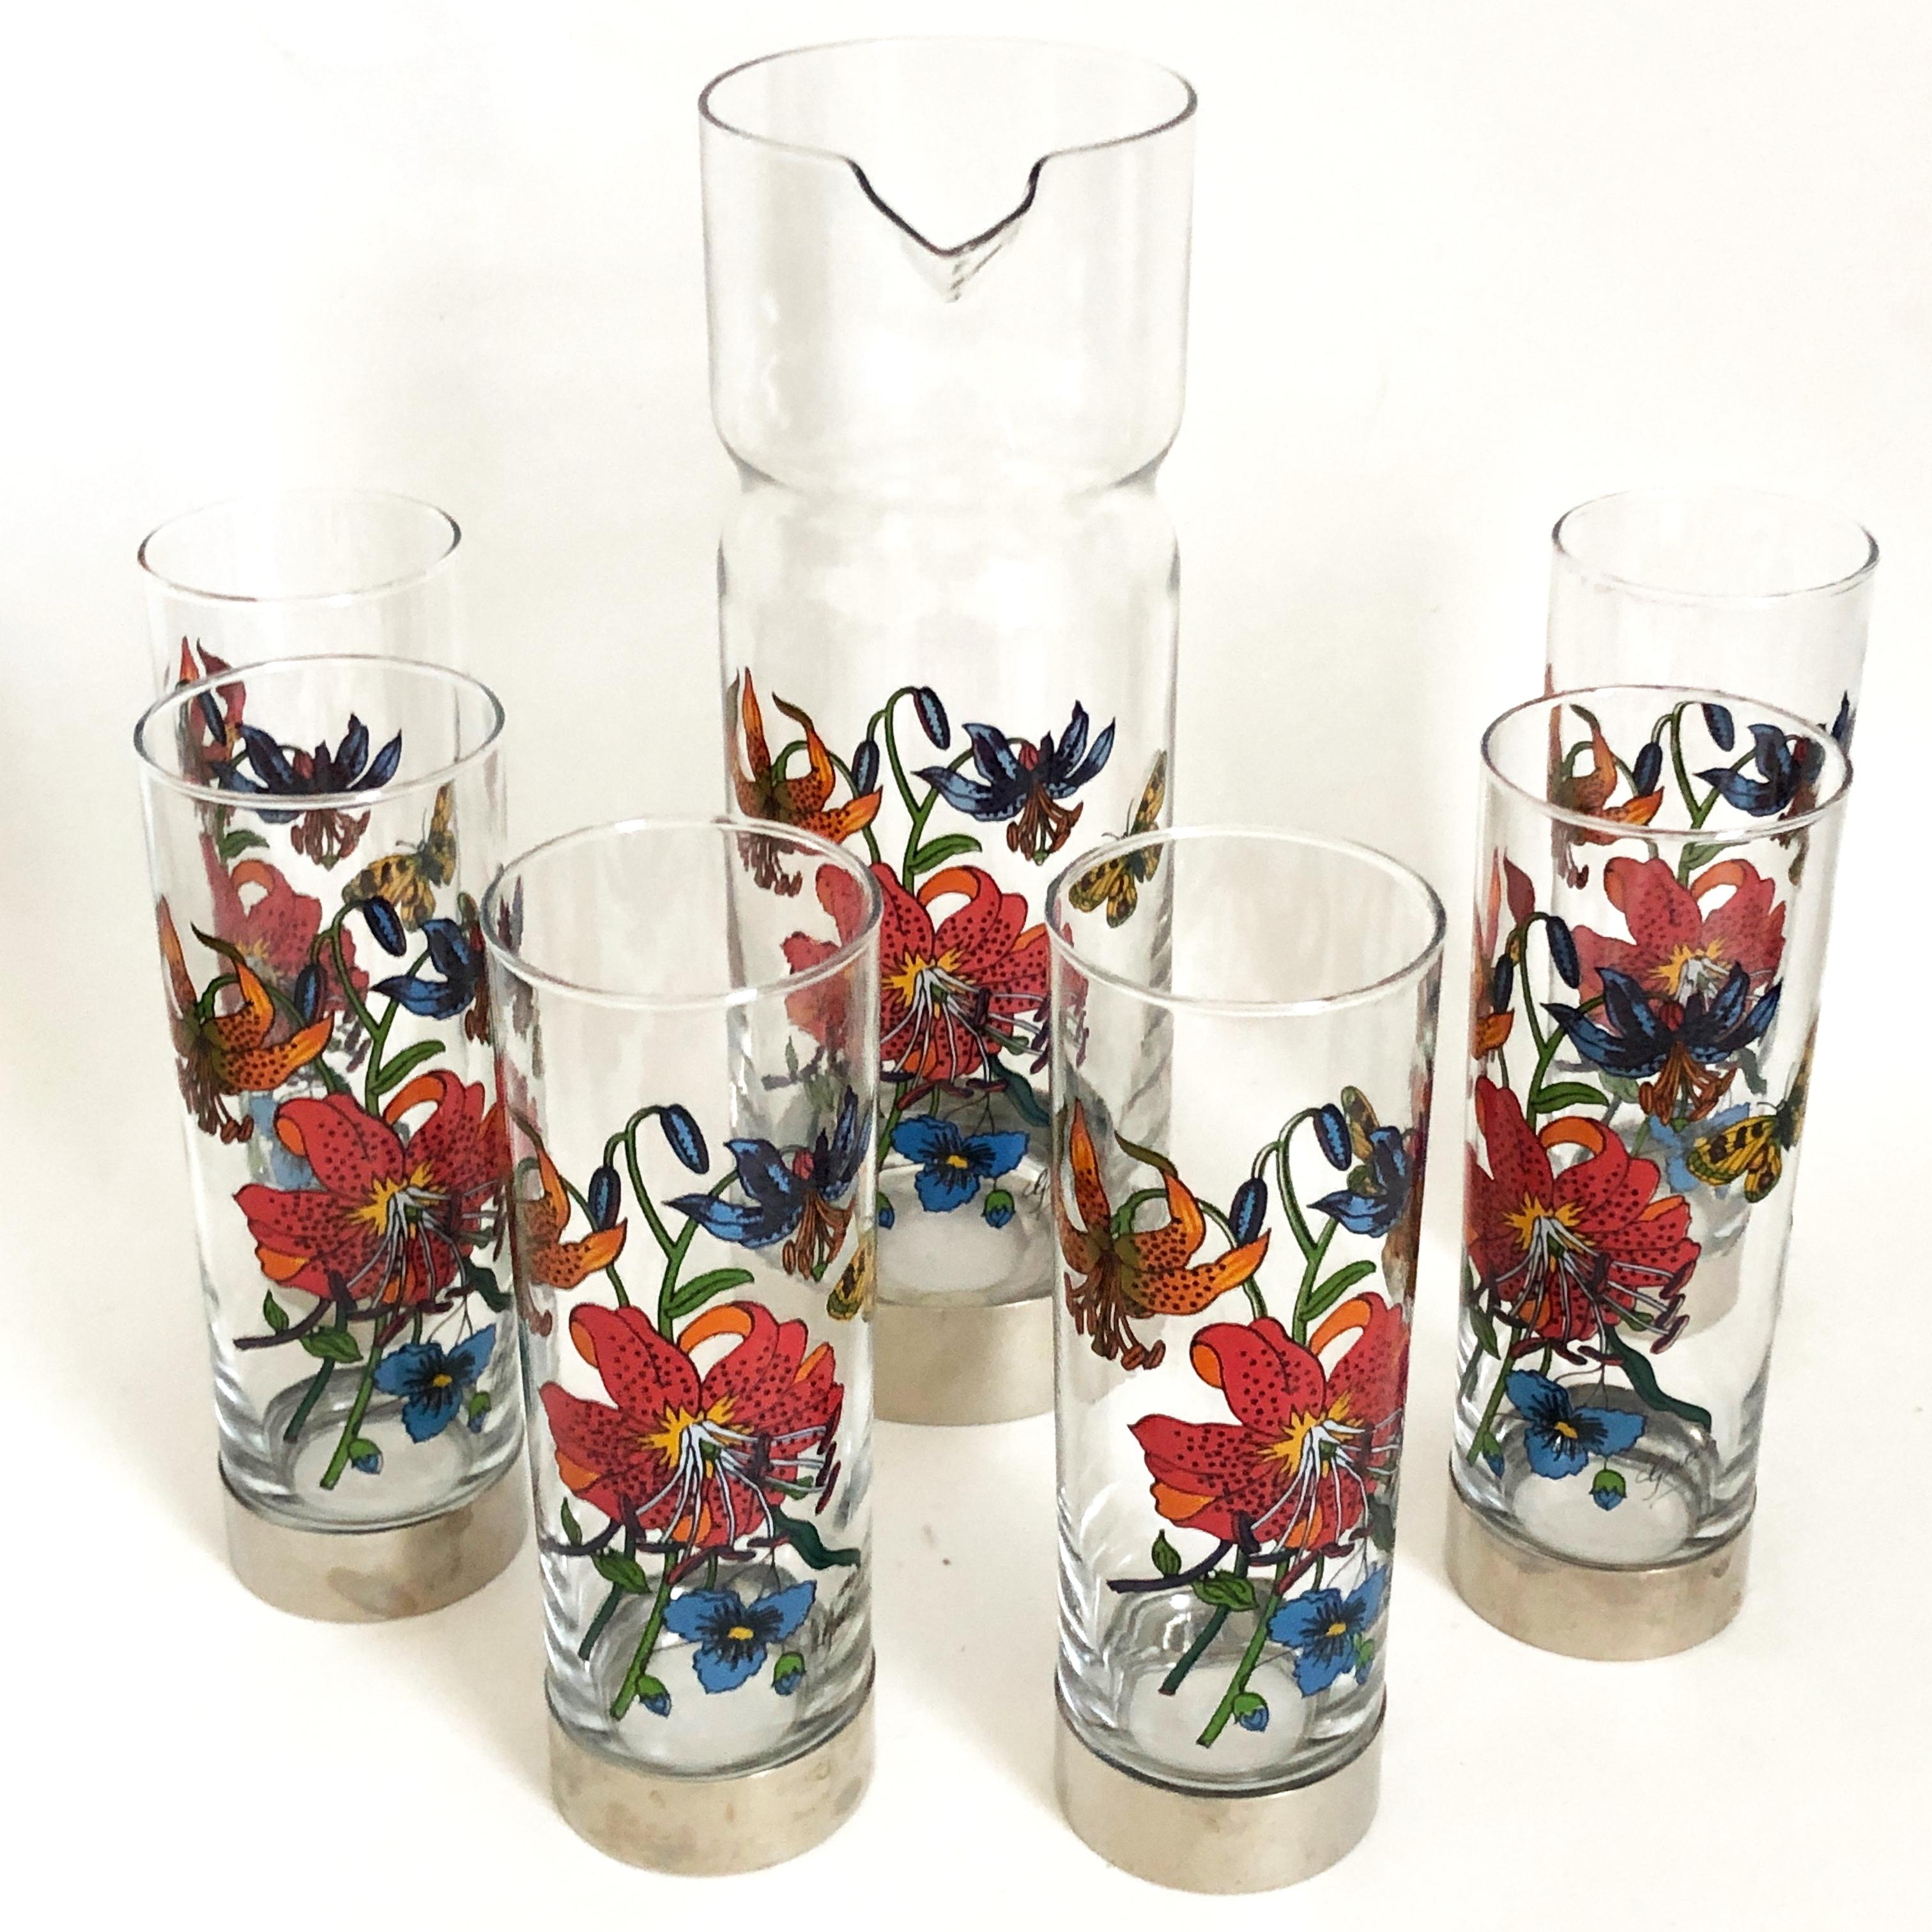 Extremely hard to find 7pc barware set by Gucci, circa the 80s.  Set includes six high ball glasses & 1 decanter, all with the 